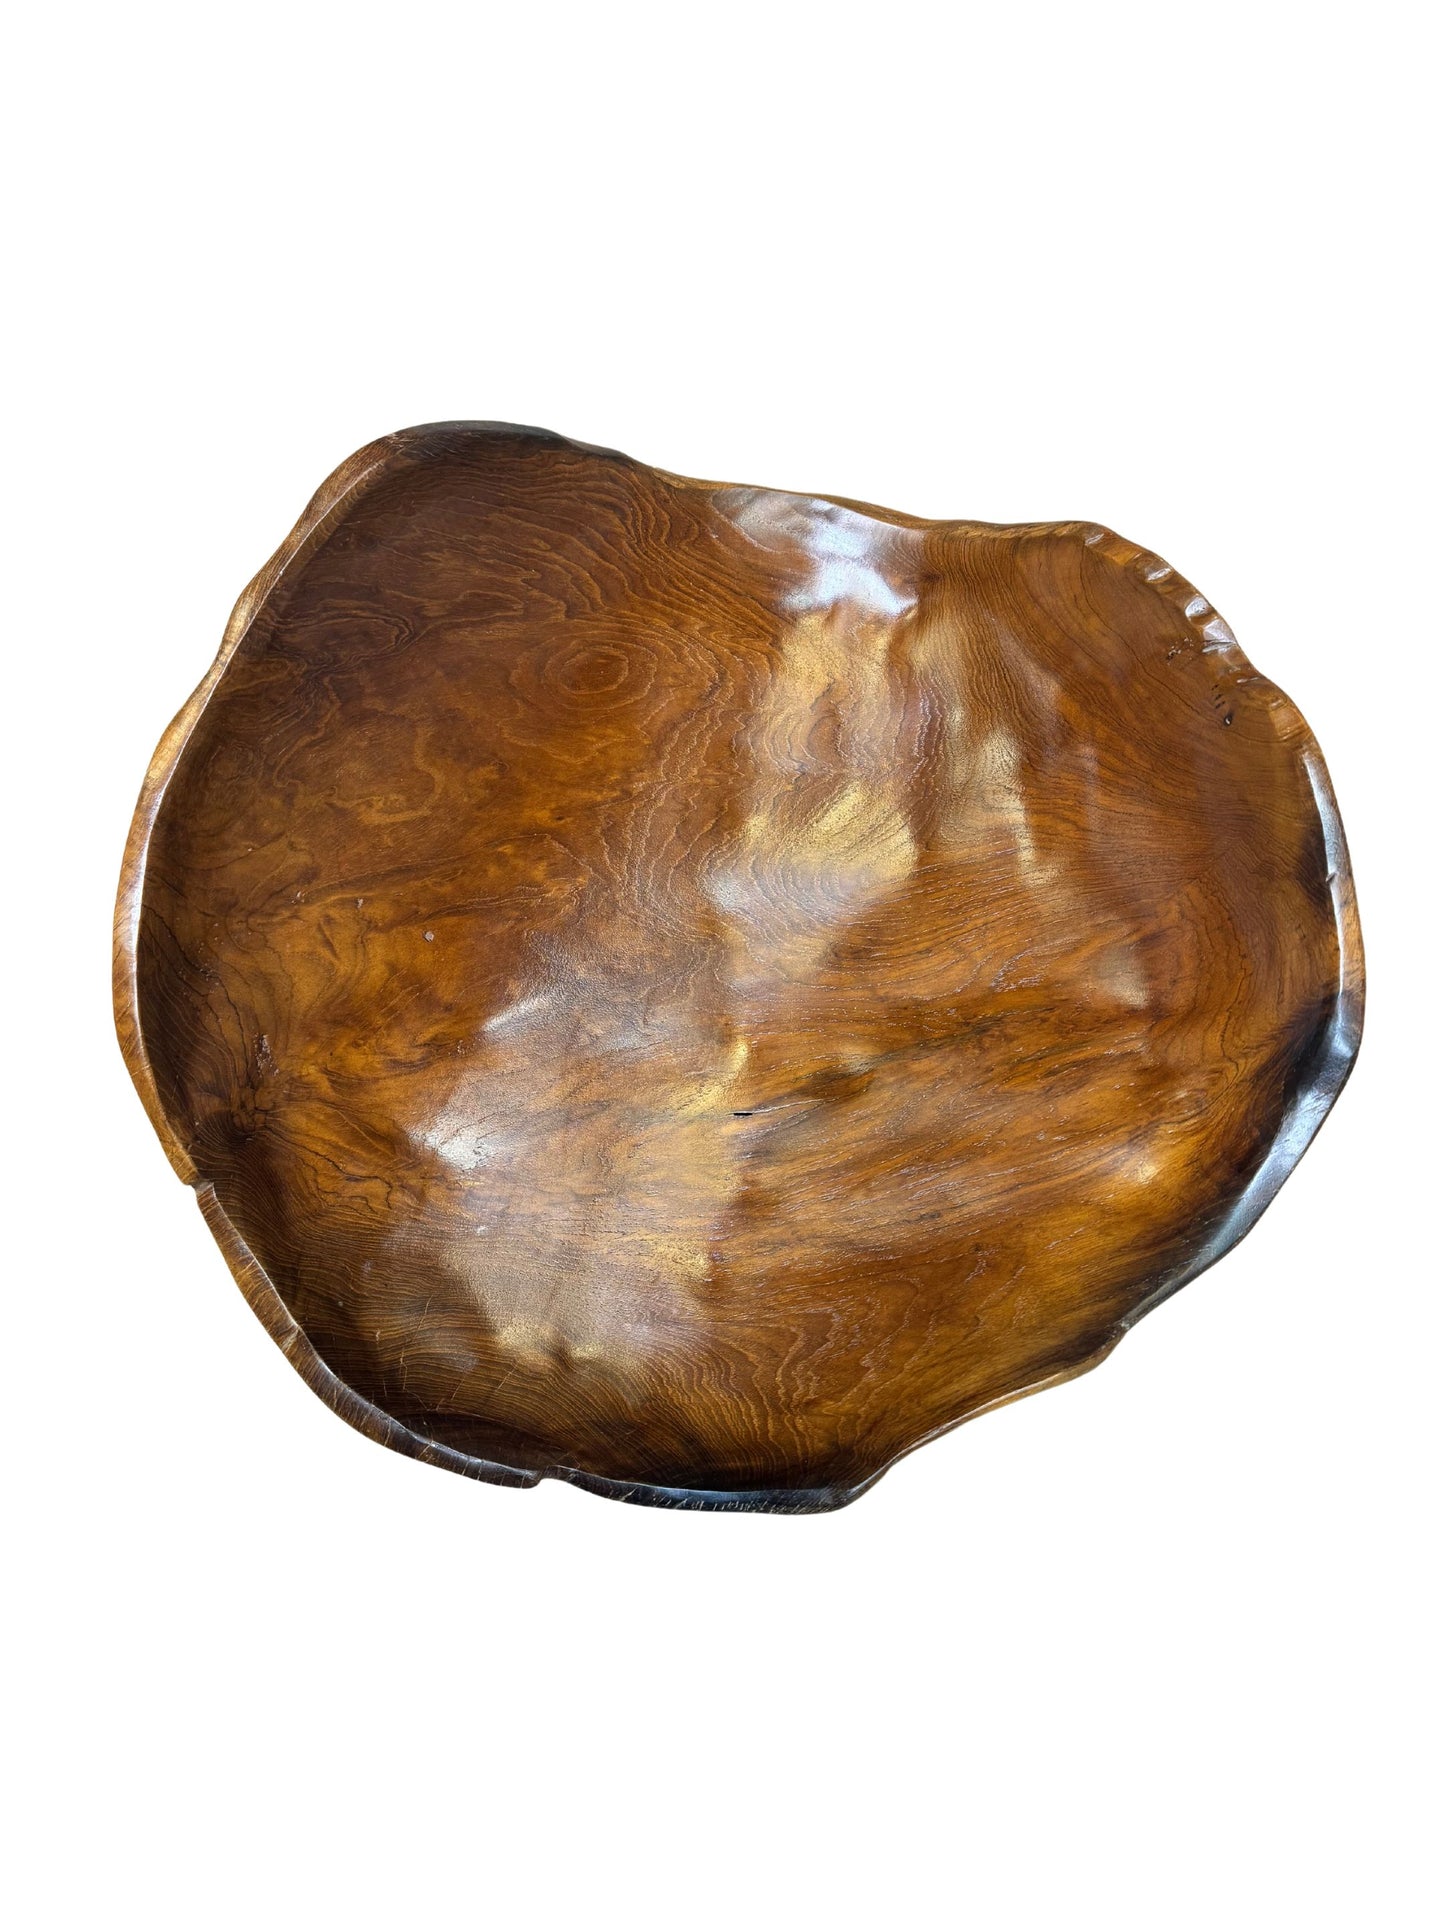 Eclectic Home Accent Teak Large Thin Bowl Wooden  Decor Furniture